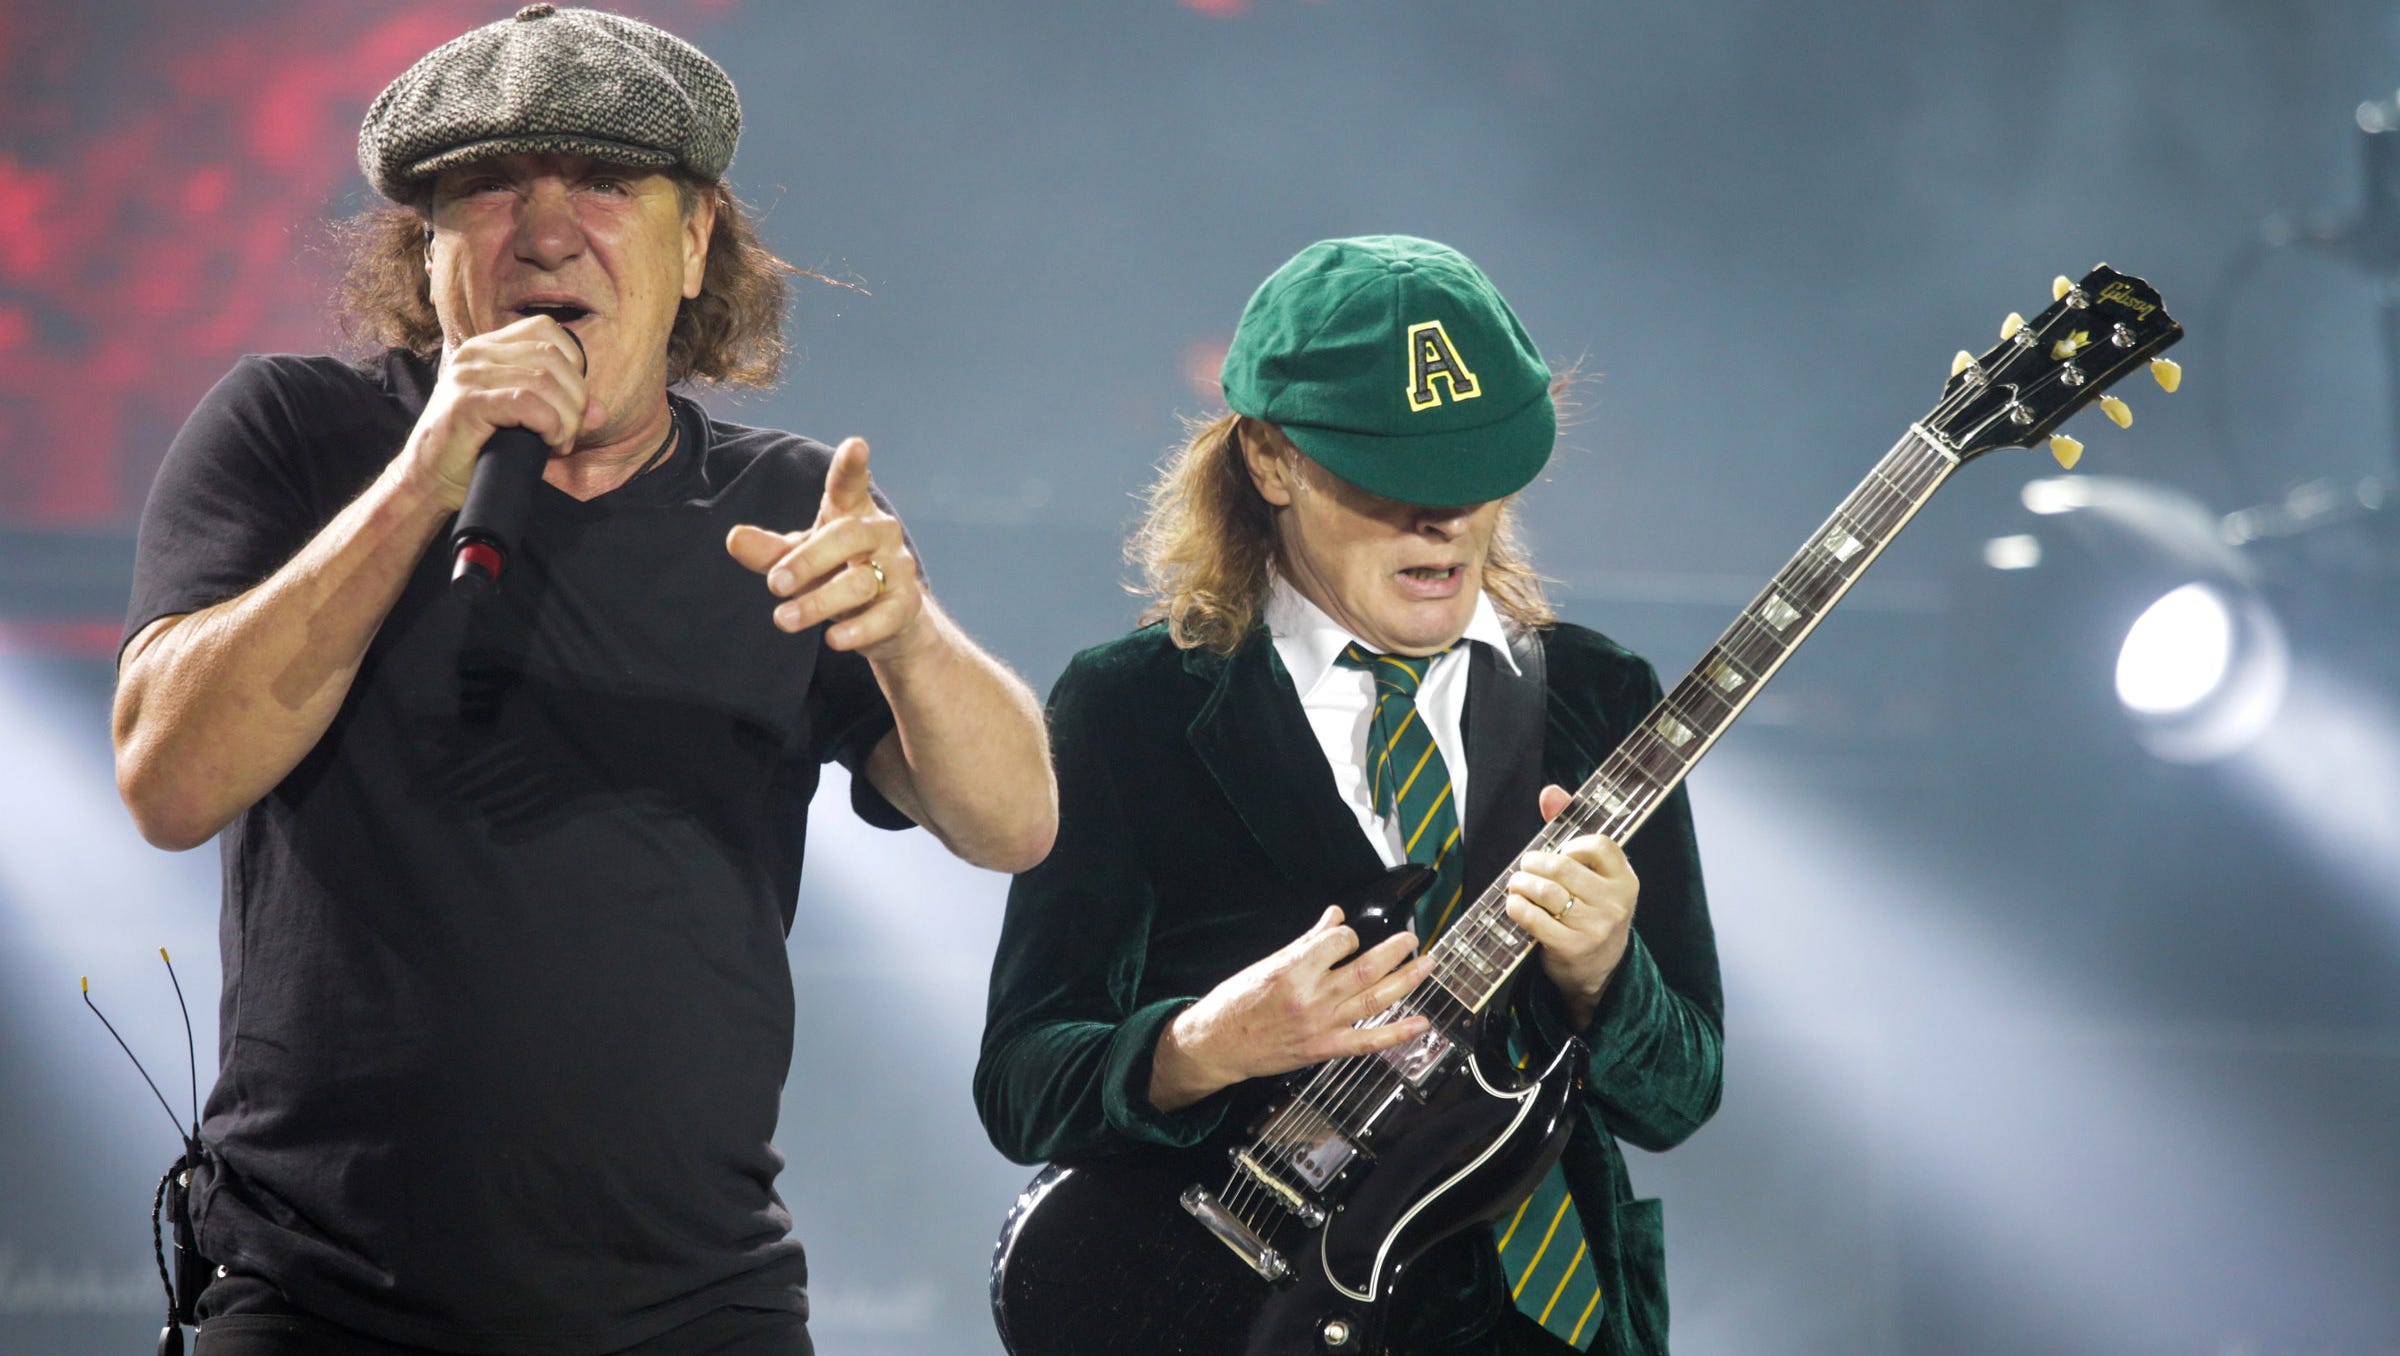 20 best AC/DC songs featuring Brian Johnson